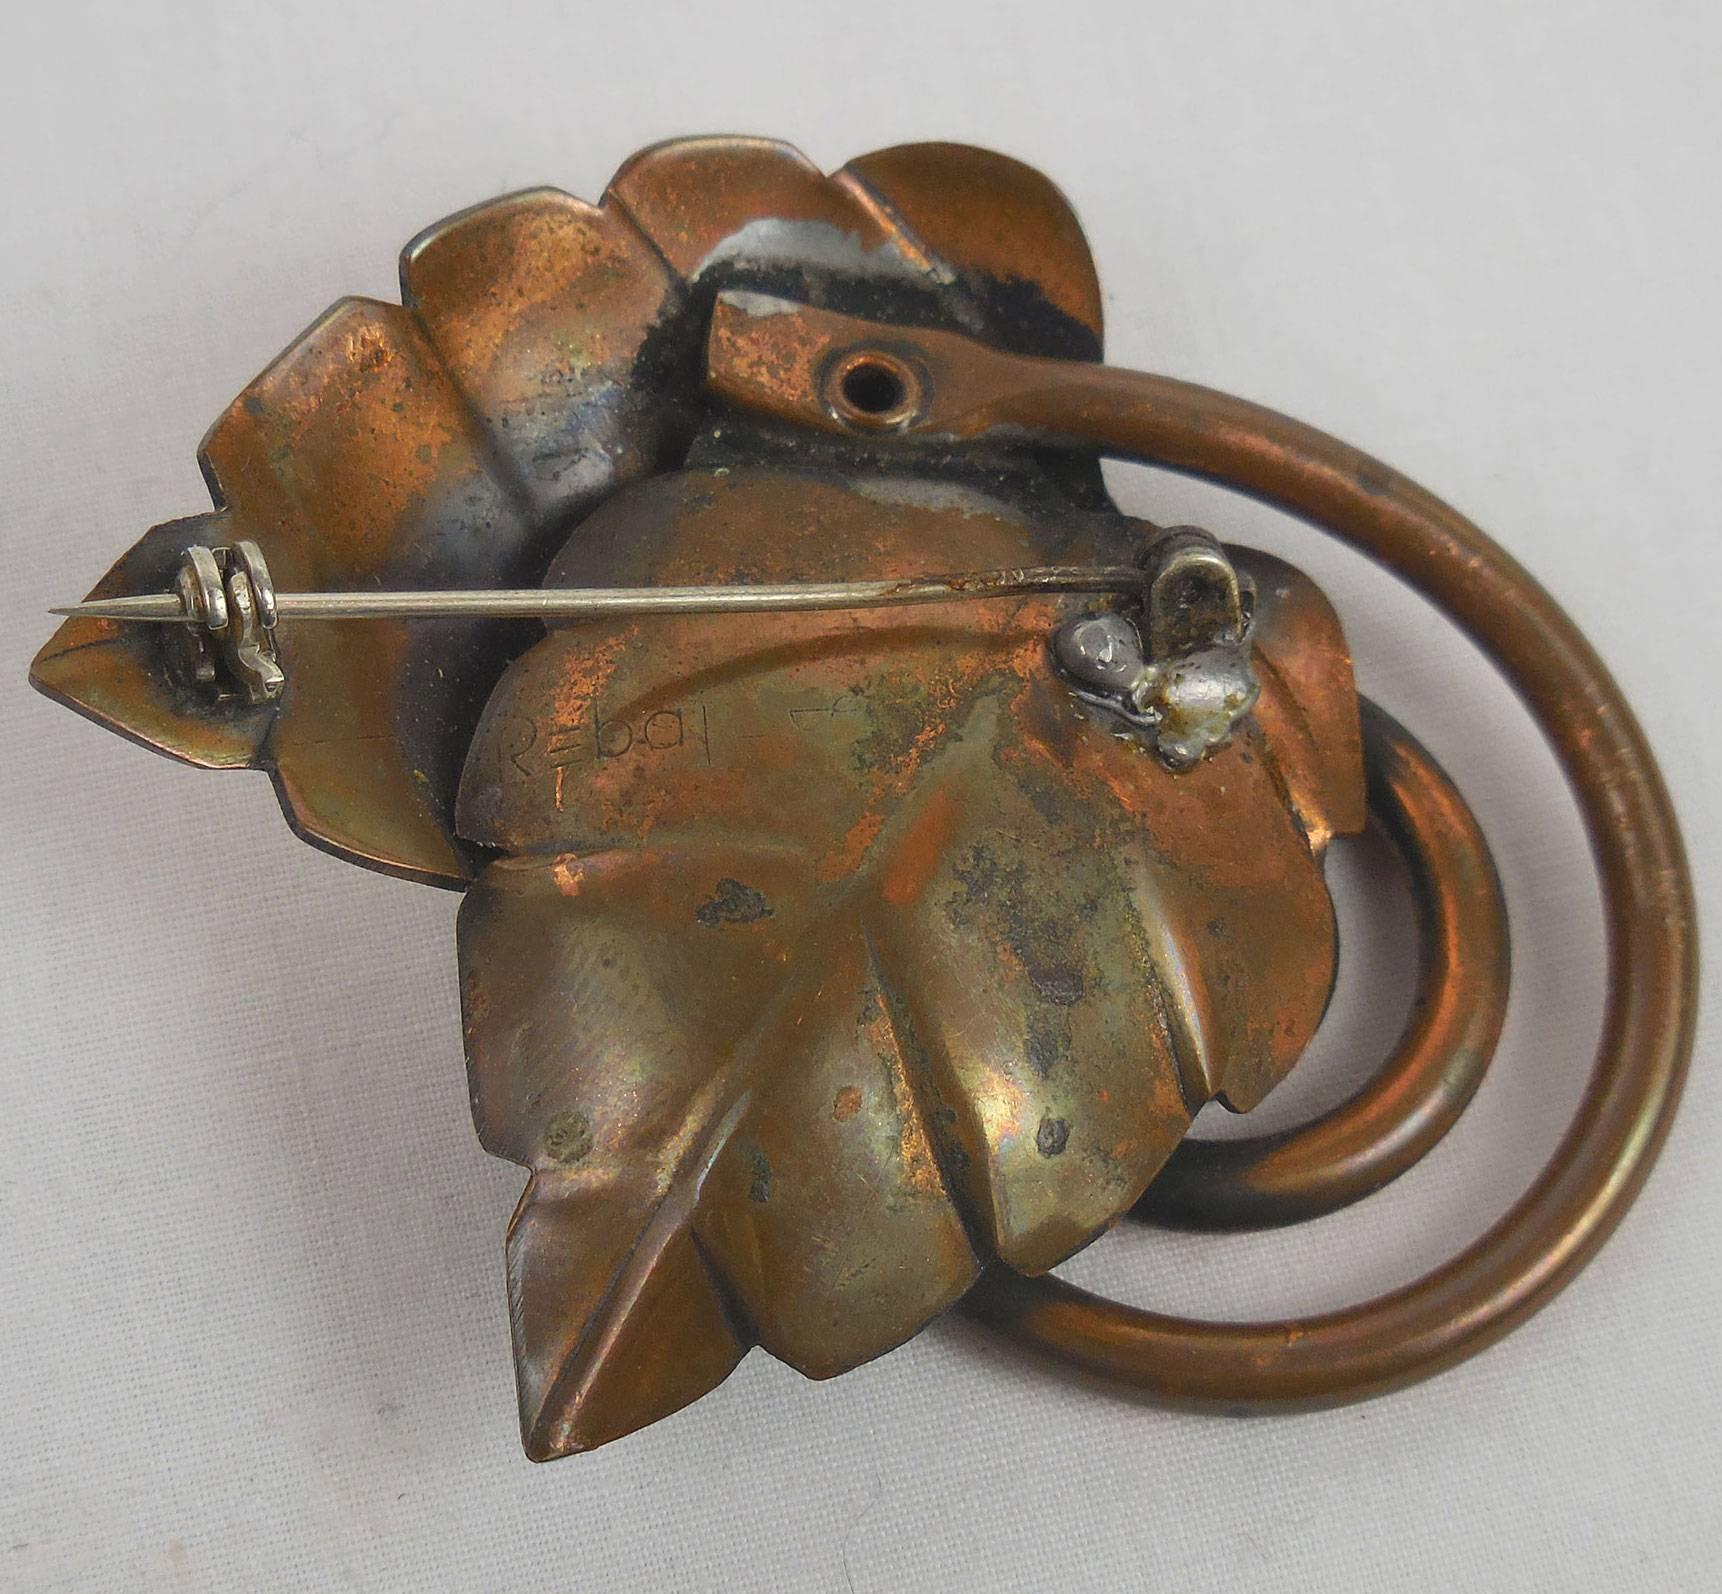 Modernist brooch pin modeled as a pair of patinated copper leaves on coiled stem, by modernist New York master, Francisco Rebajes: signed to reverse. Classic and Chic...Add your own Style and Pizzazz to any outfit!